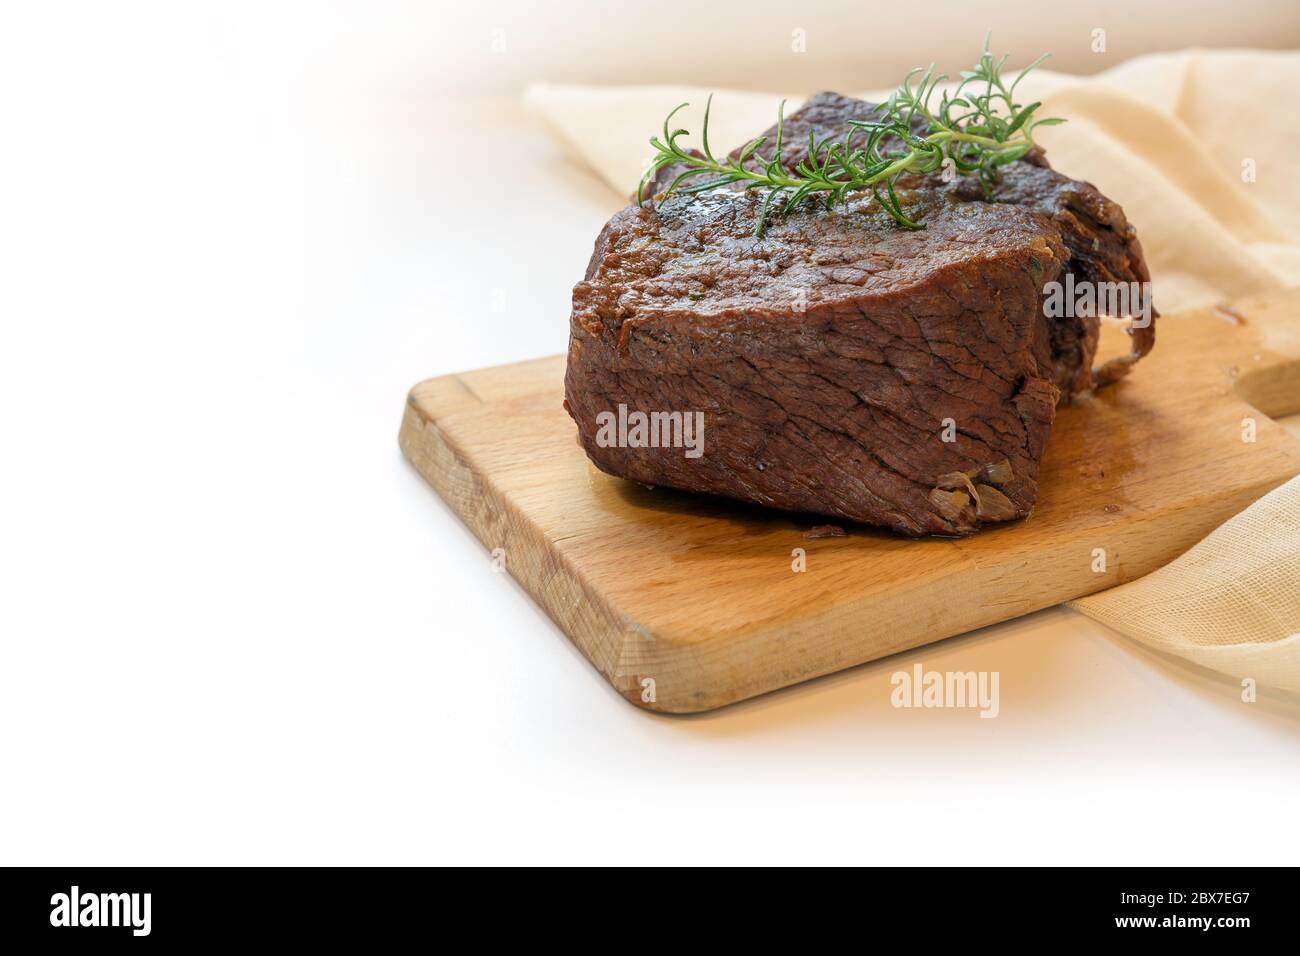 Piece of roast beef braised in red wine with thyme garnish on a cutting board, typical preparation for boeuf bourguignon, the light background is fadi Stock Photo